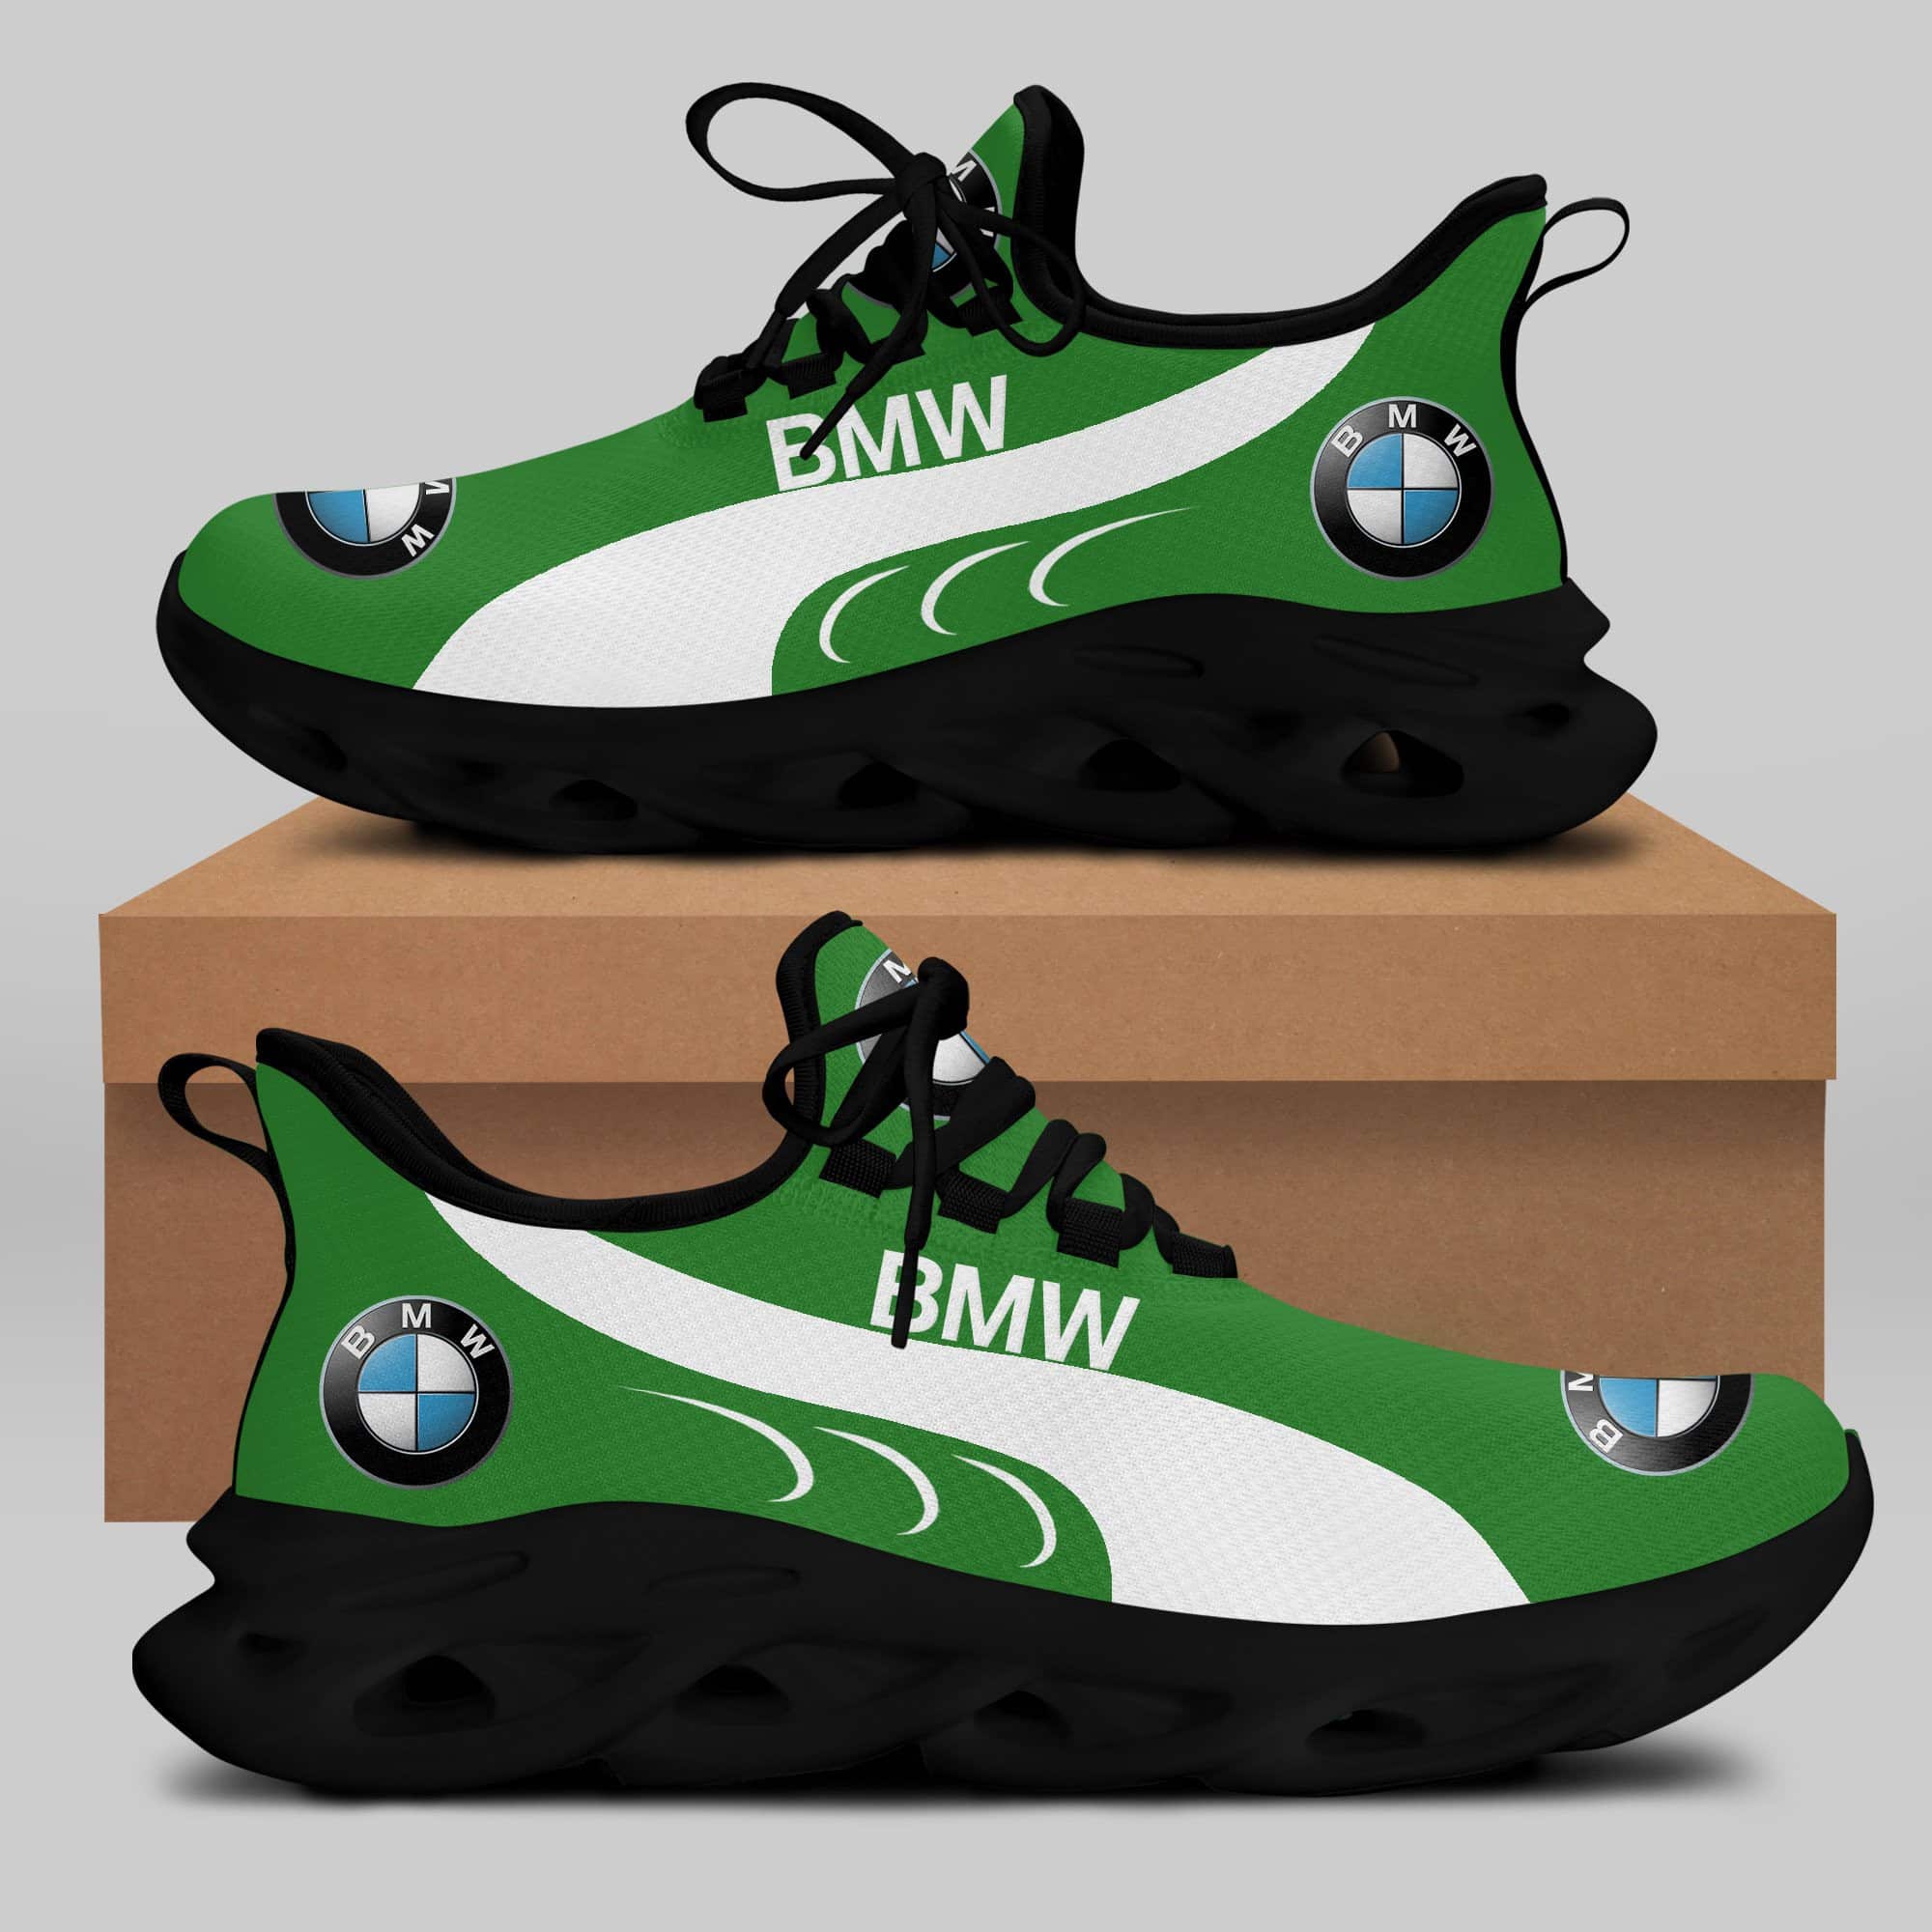 Bmw Running Shoes Max Soul Shoes Sneakers Ver 54 2